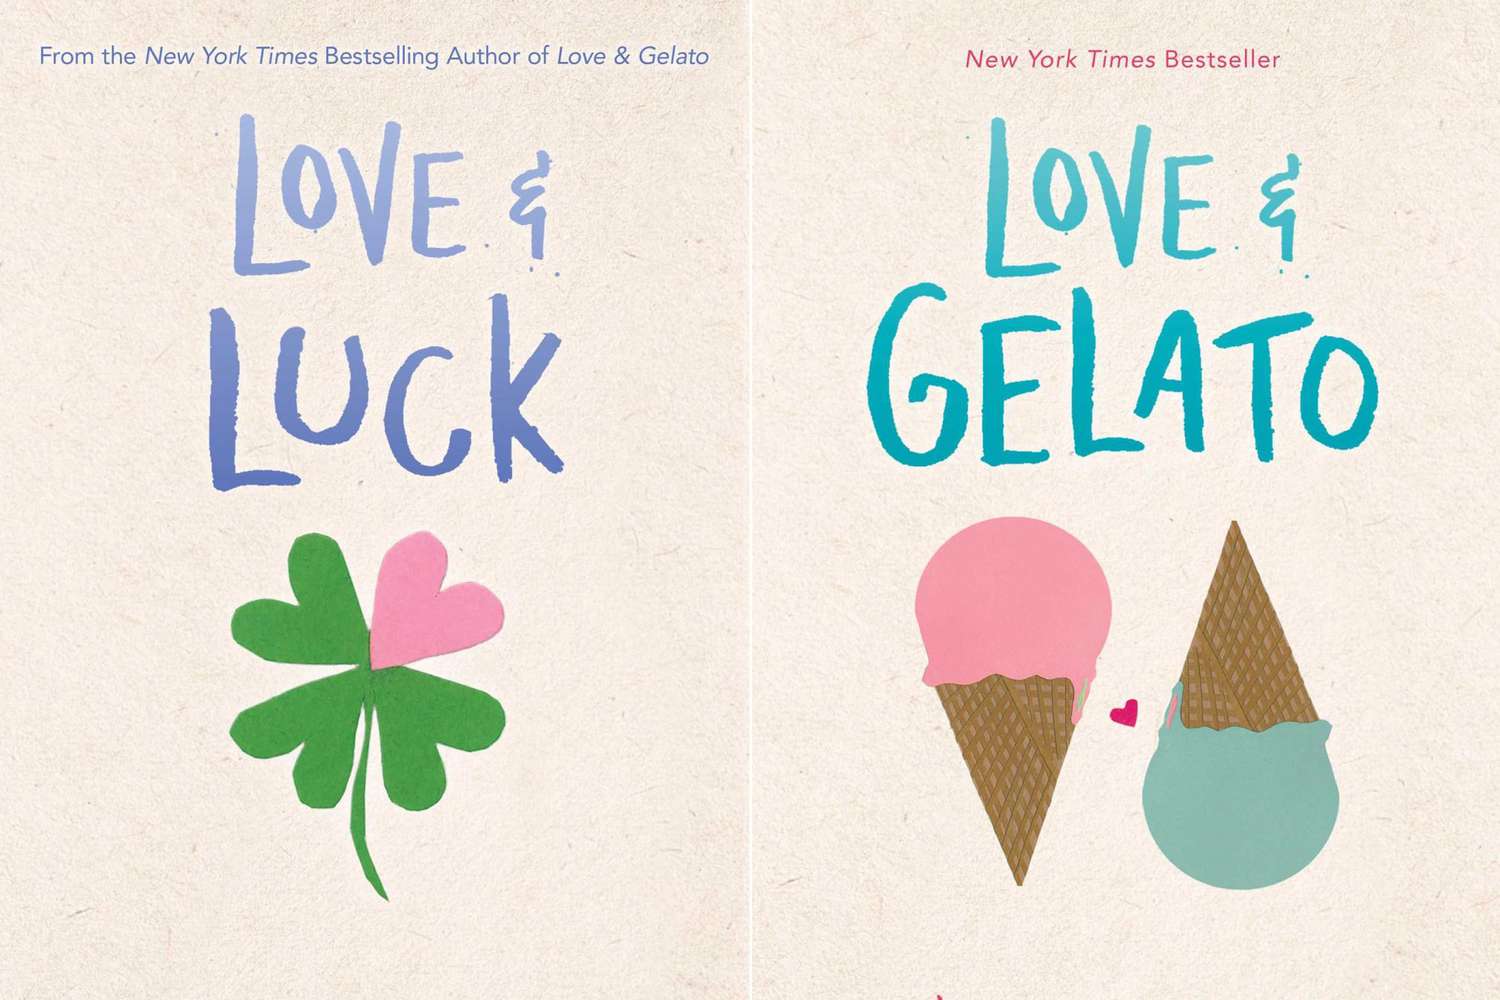 Love-and-Luck-Gelato